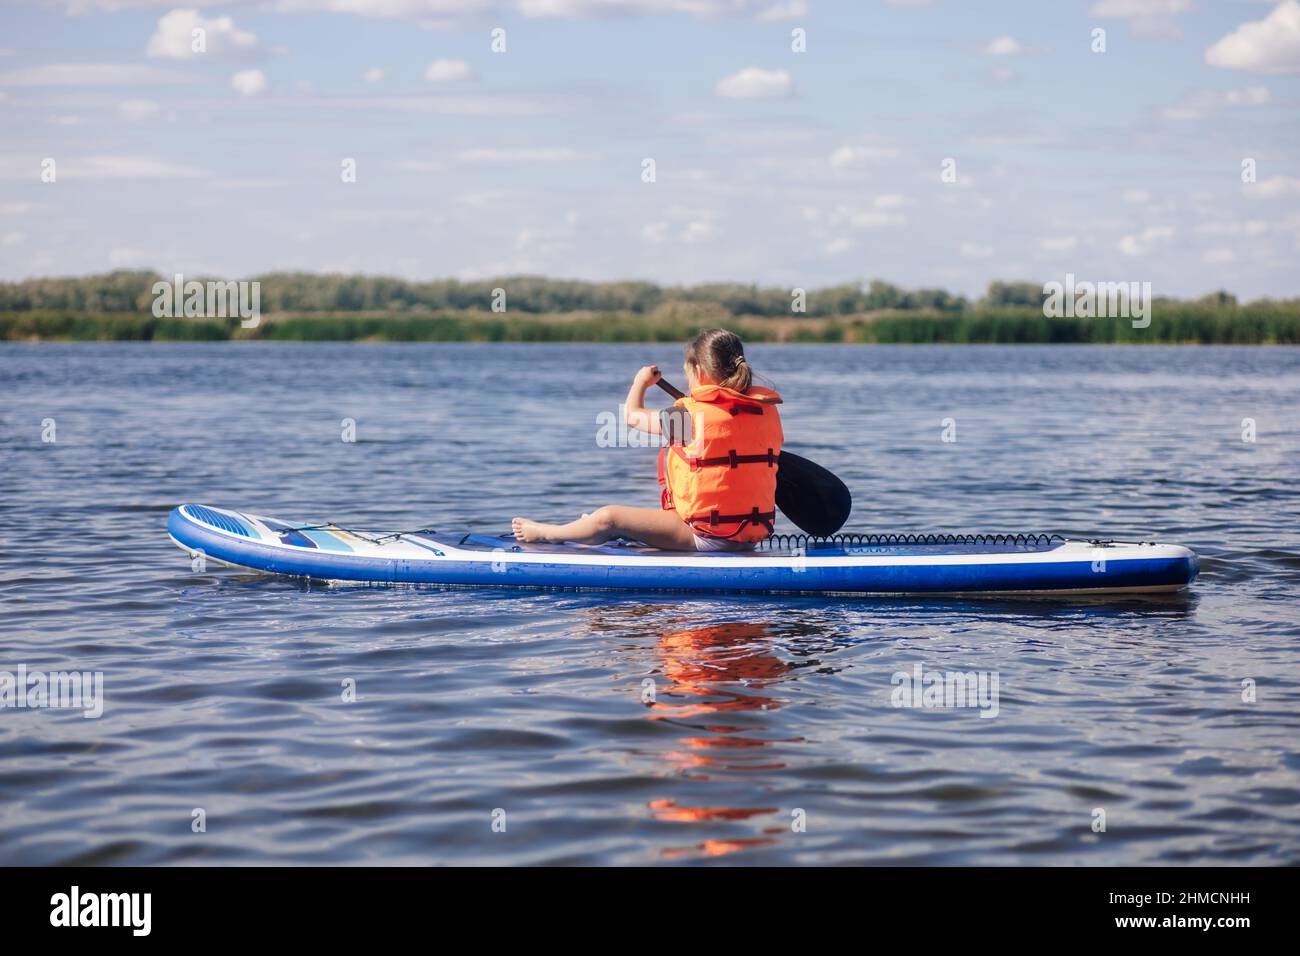 Blonde small girl sup boarding on lake in daytime rowing with oar with reeds and trees in background wearing vest life jacket. Active holidays Stock Photo